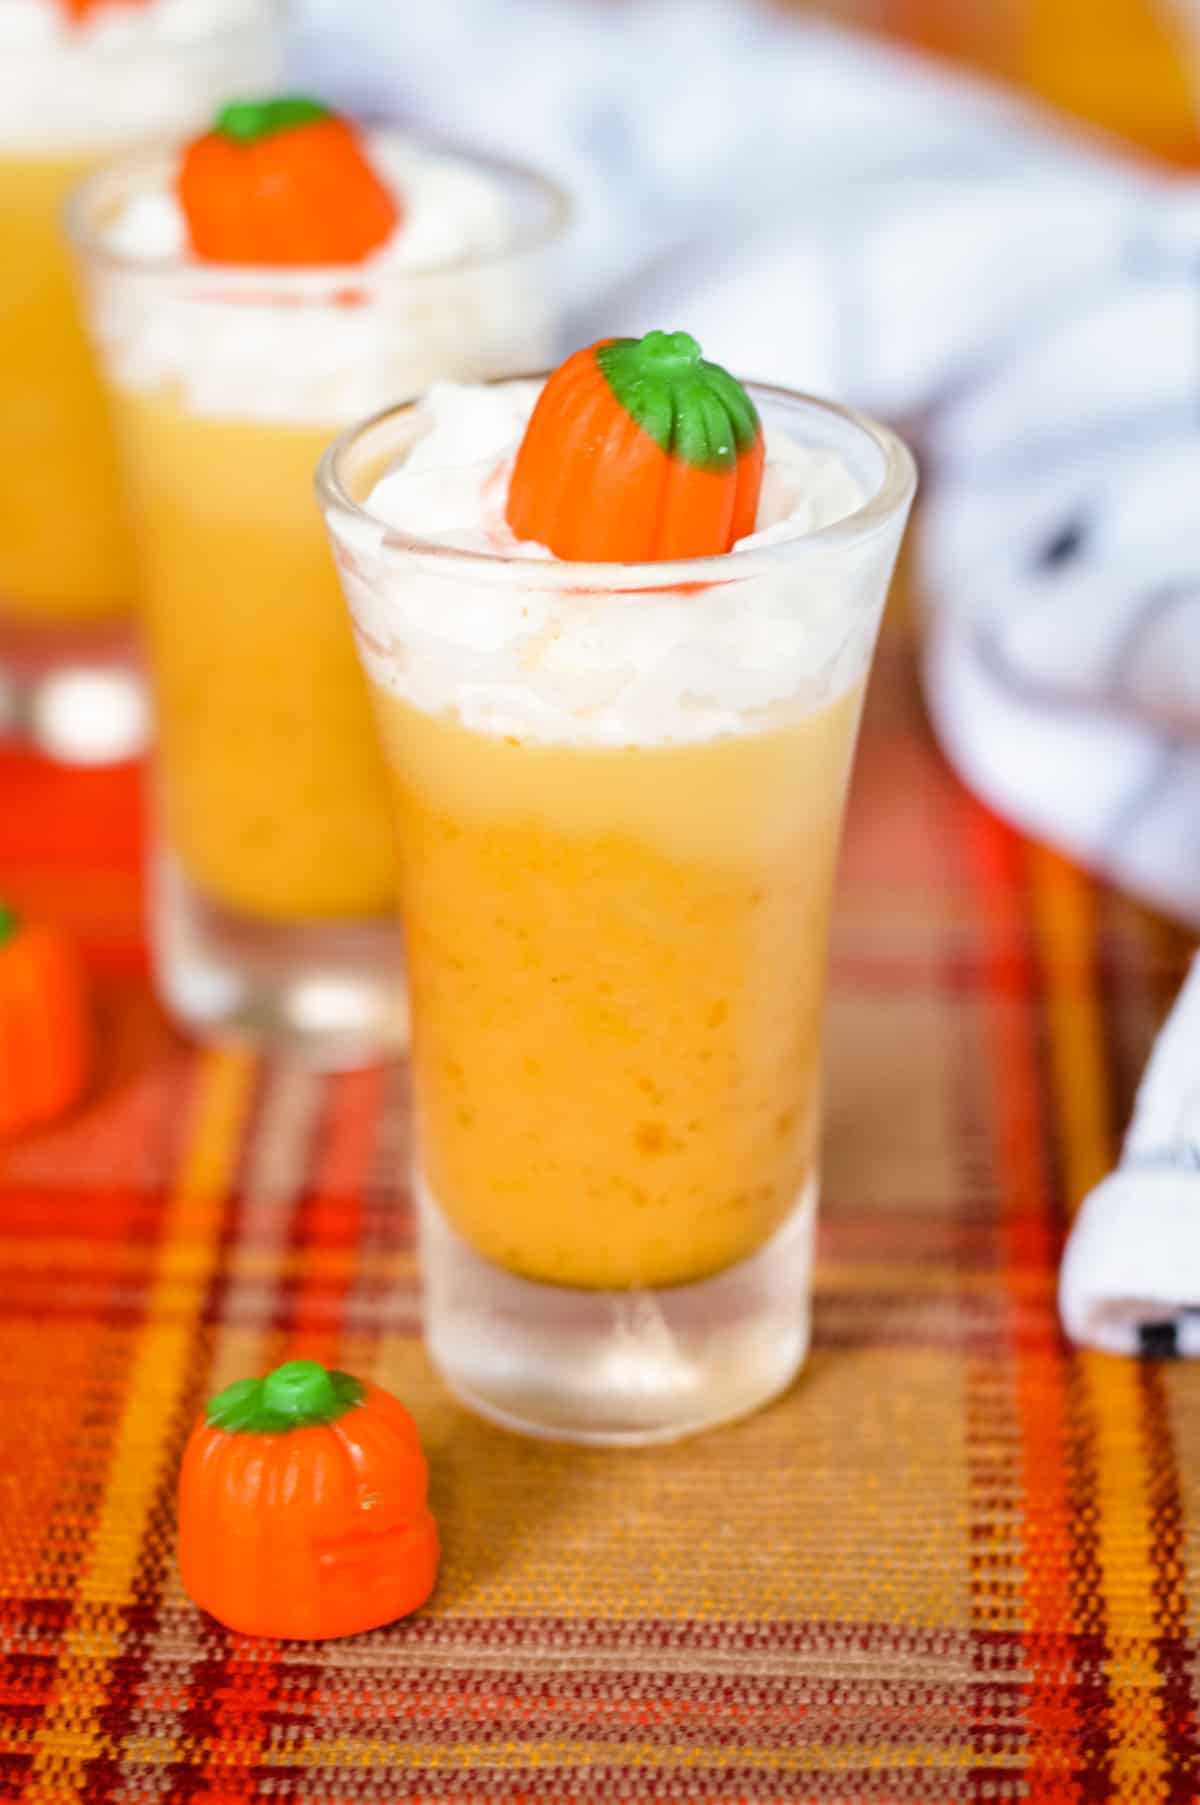 Pumpkin Pie Jello Shot in tall glass shot glass. The thick, orange shot is topped with whipped cream and a candy pumpkin.